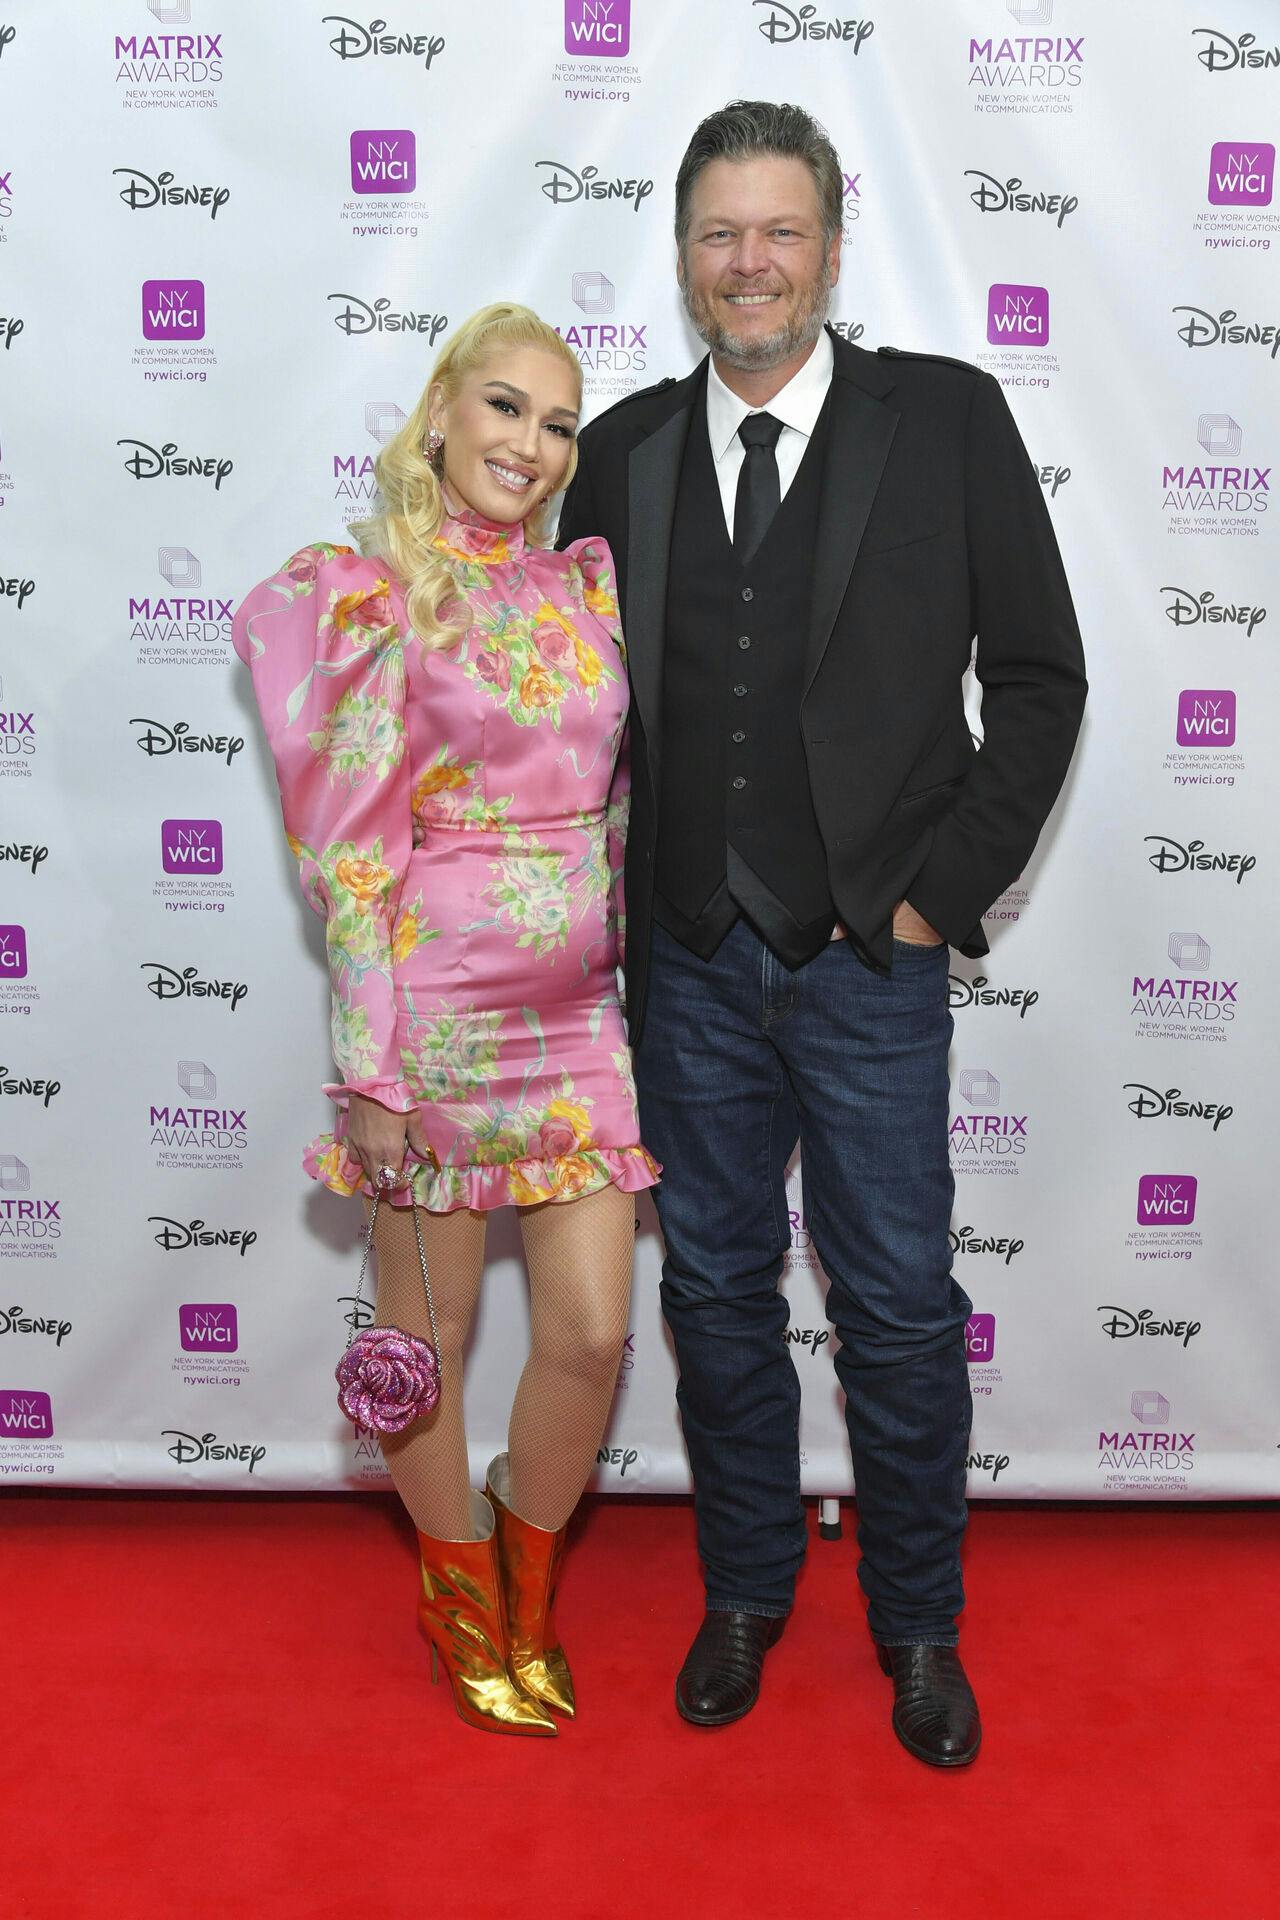 Photo by: NDZ/STAR MAX/IPx 2022 10/26/22 Gwen Stefani and Blake Shelton at the NYWICI's Matrix Awards on October 26, 2022 in New York City.